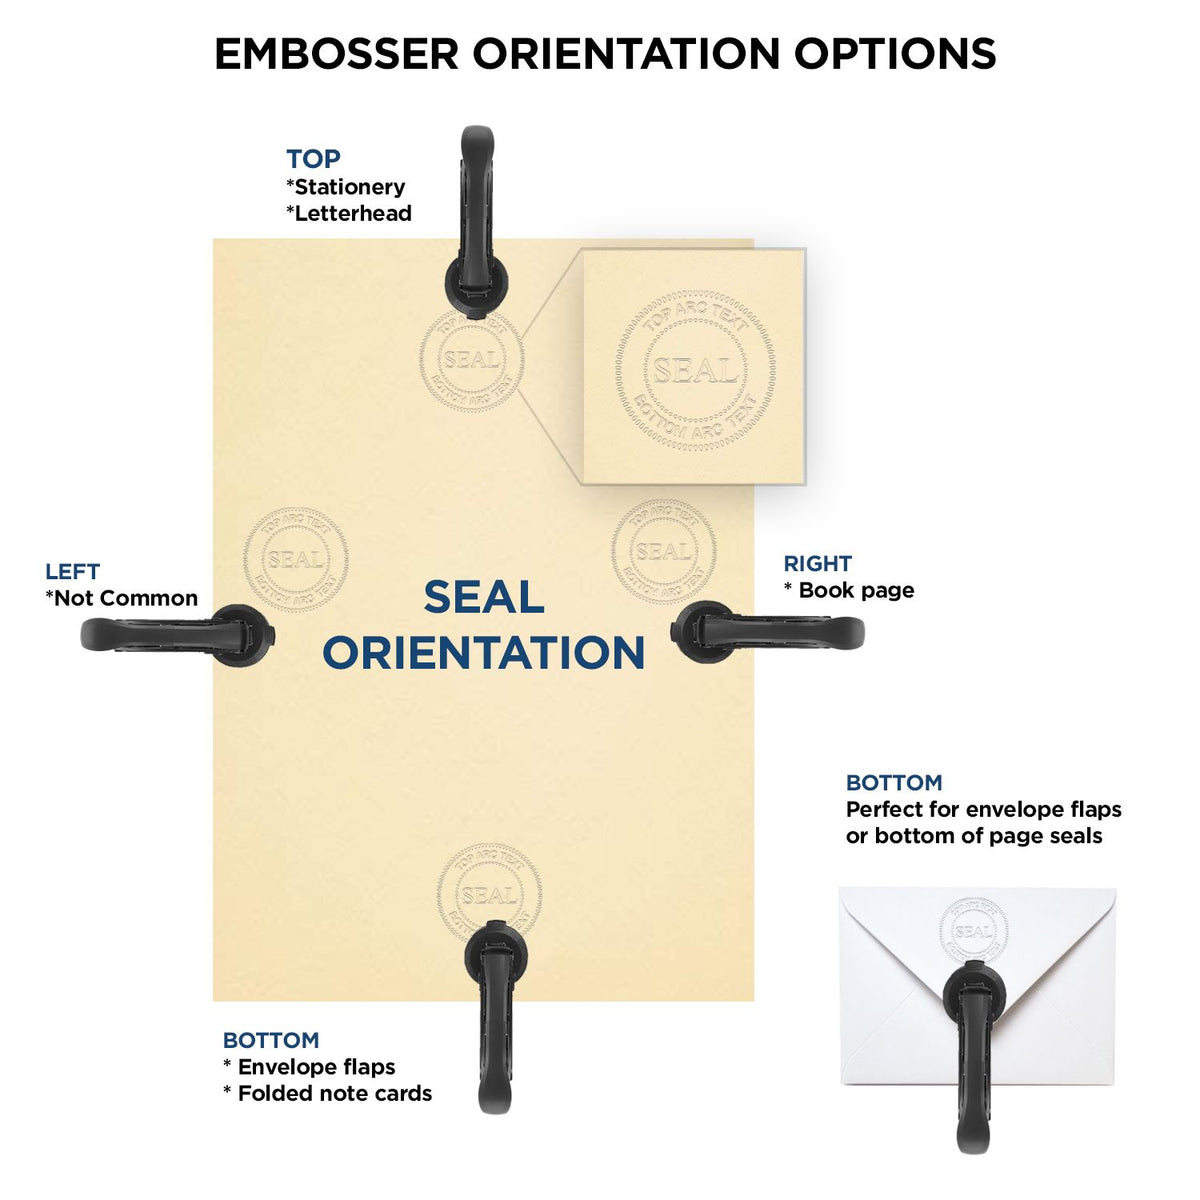 An infographic for the Gift Utah Engineer Seal showing embosser orientation, this is showing examples of a top, bottom, right and left insert.